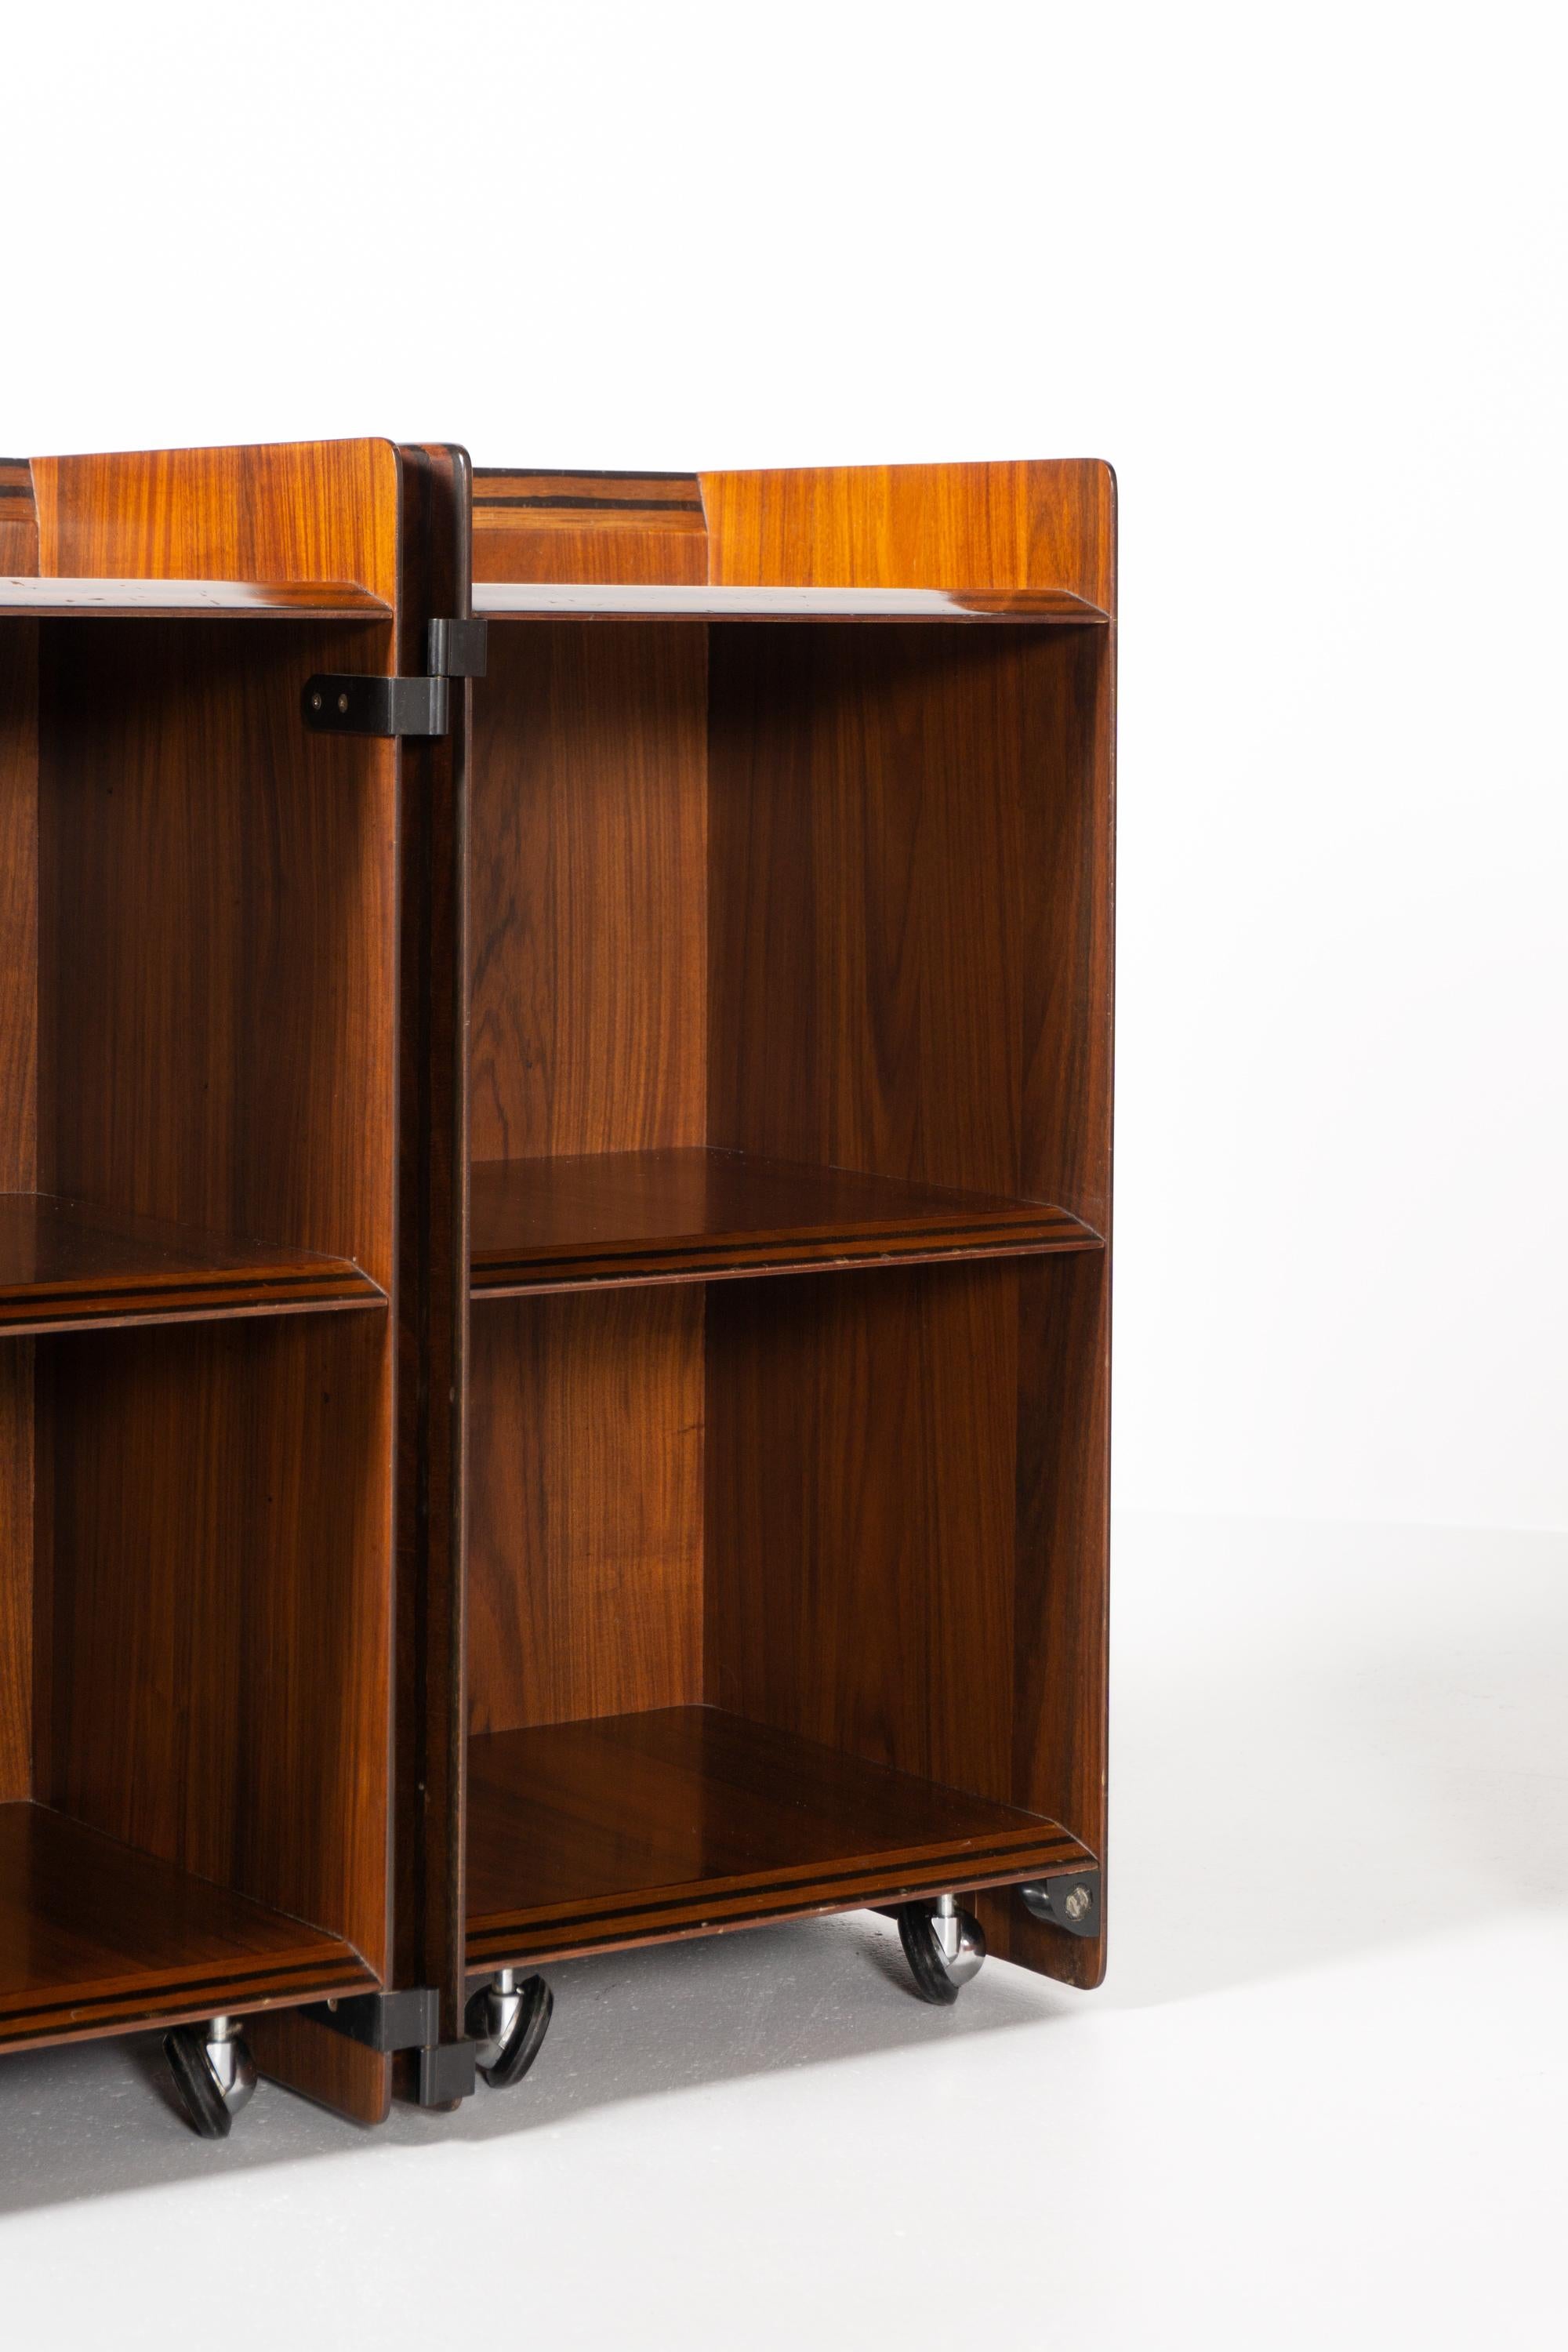 Two Cabinets on Rollers, Model 'Artona' by Afra and Tobia Scarpa, 1975 In Excellent Condition For Sale In Berlin, DE